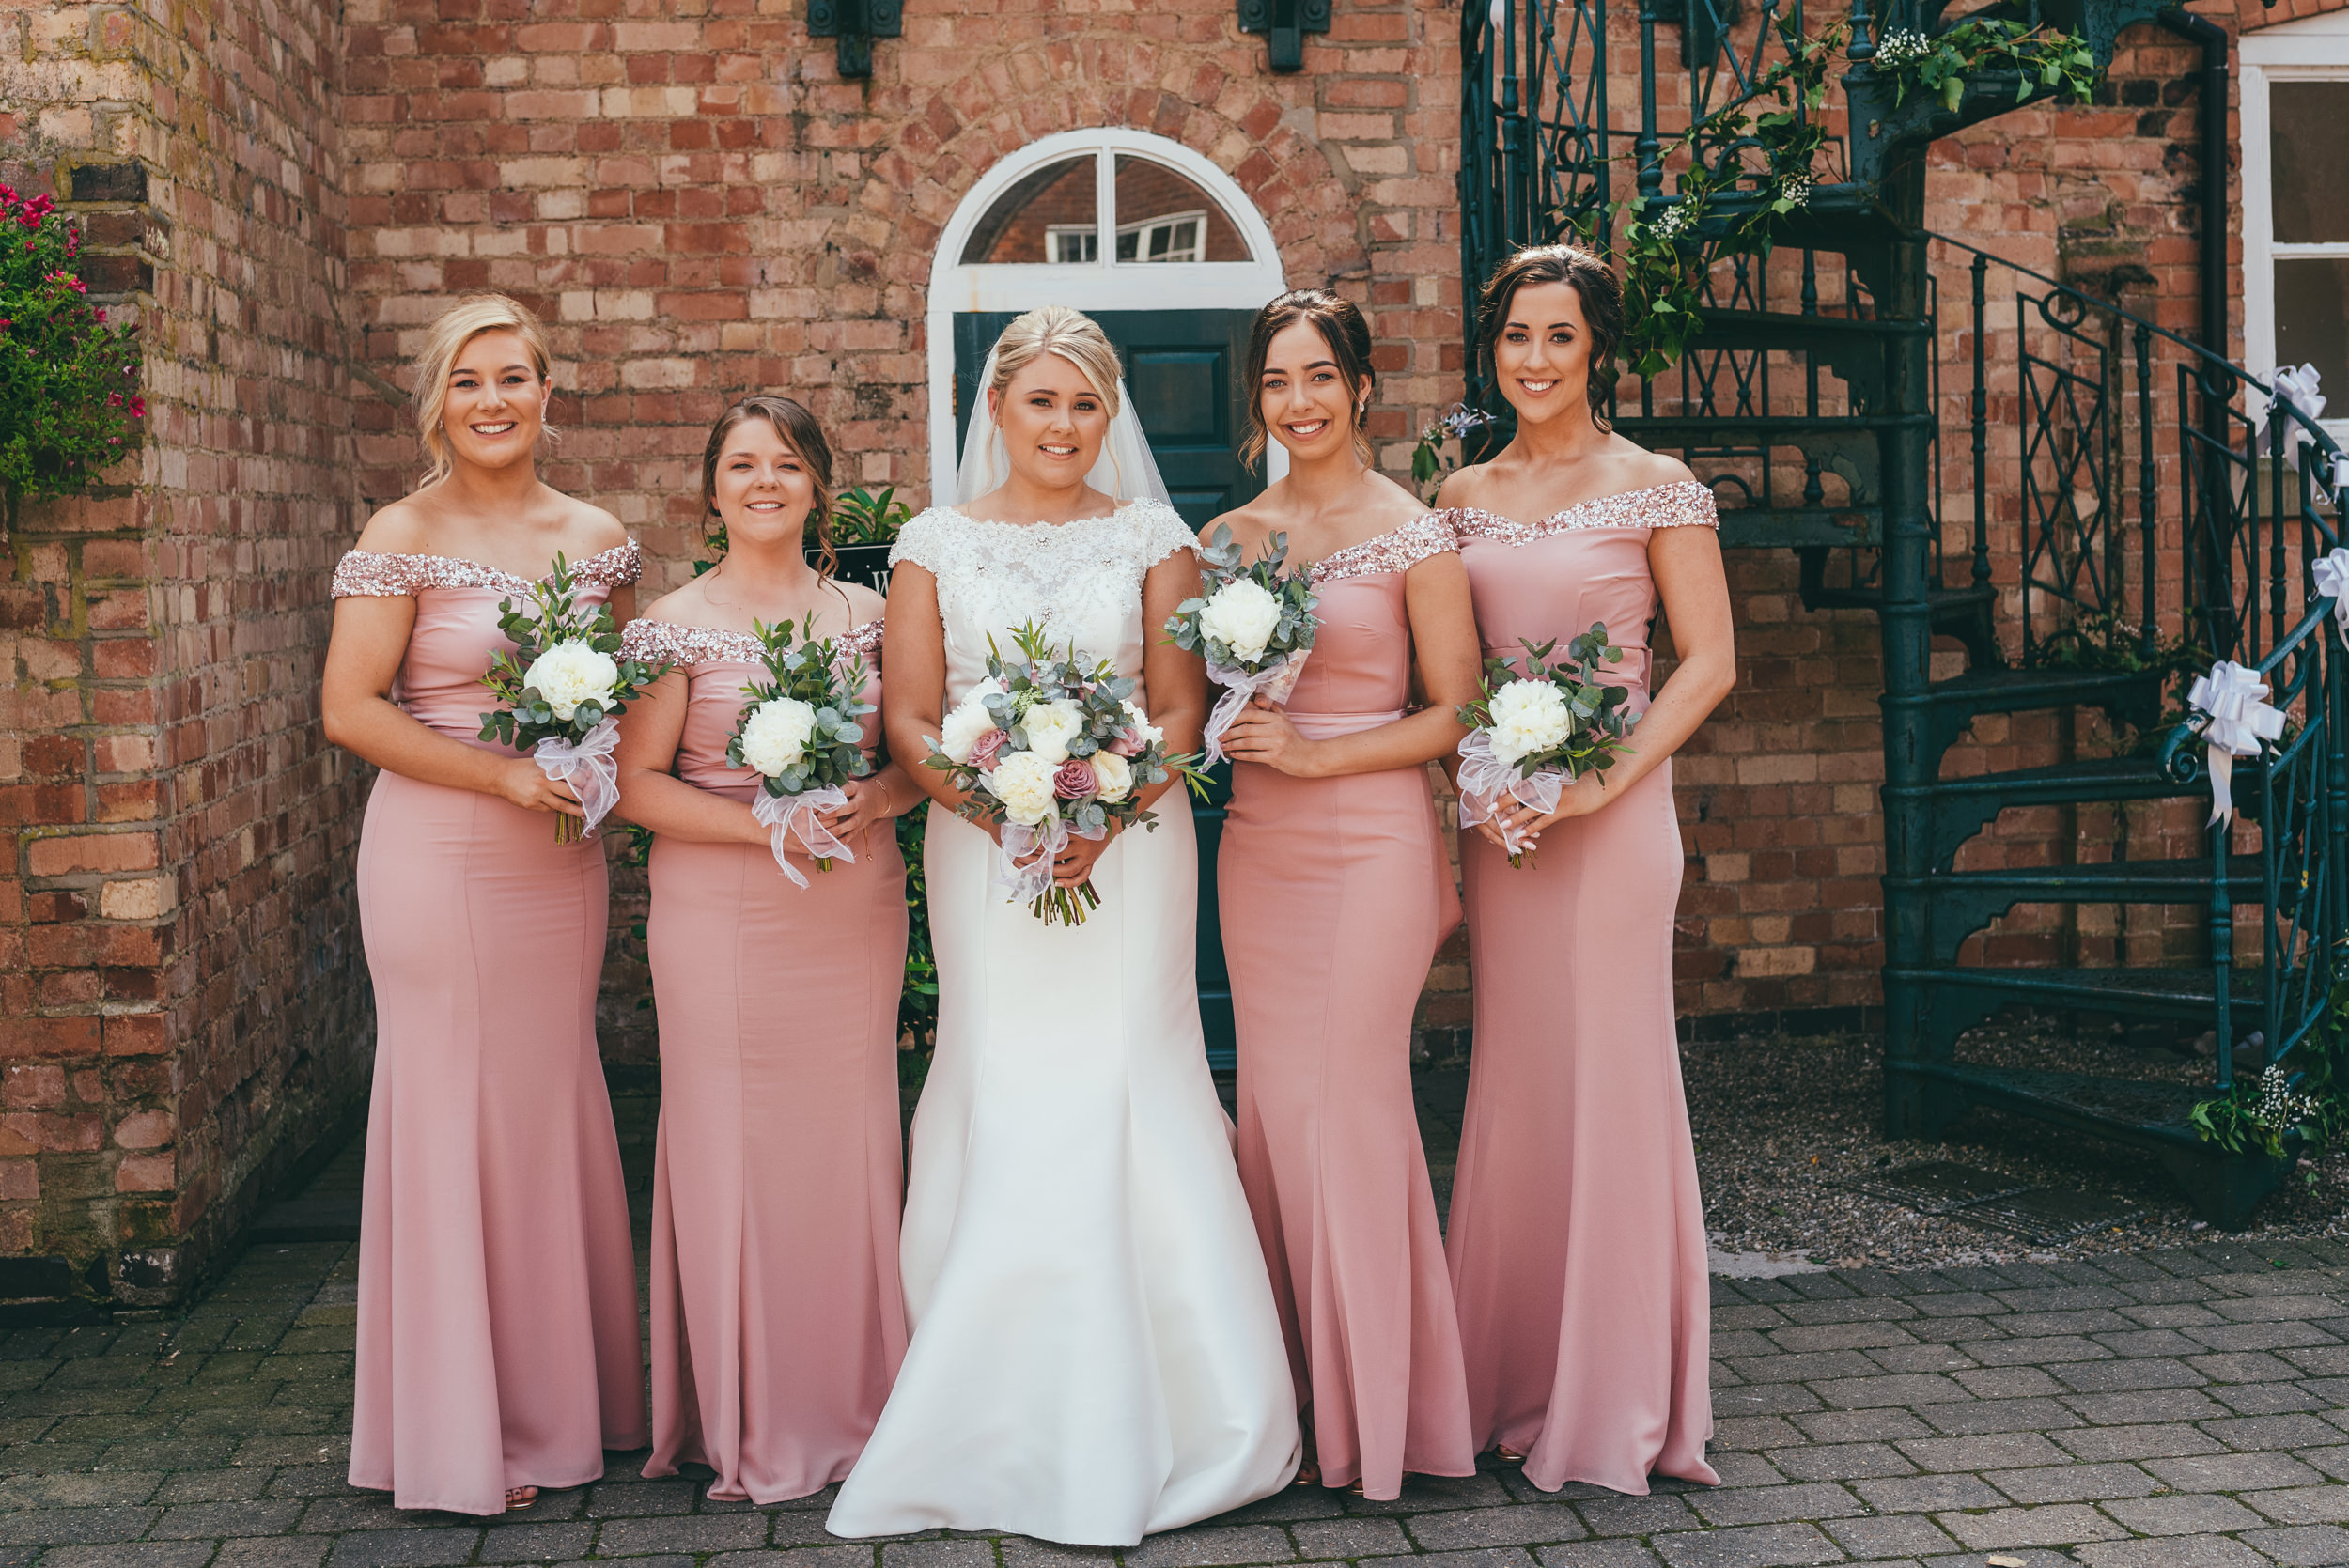 group photograph of the bride and her bridesmaids